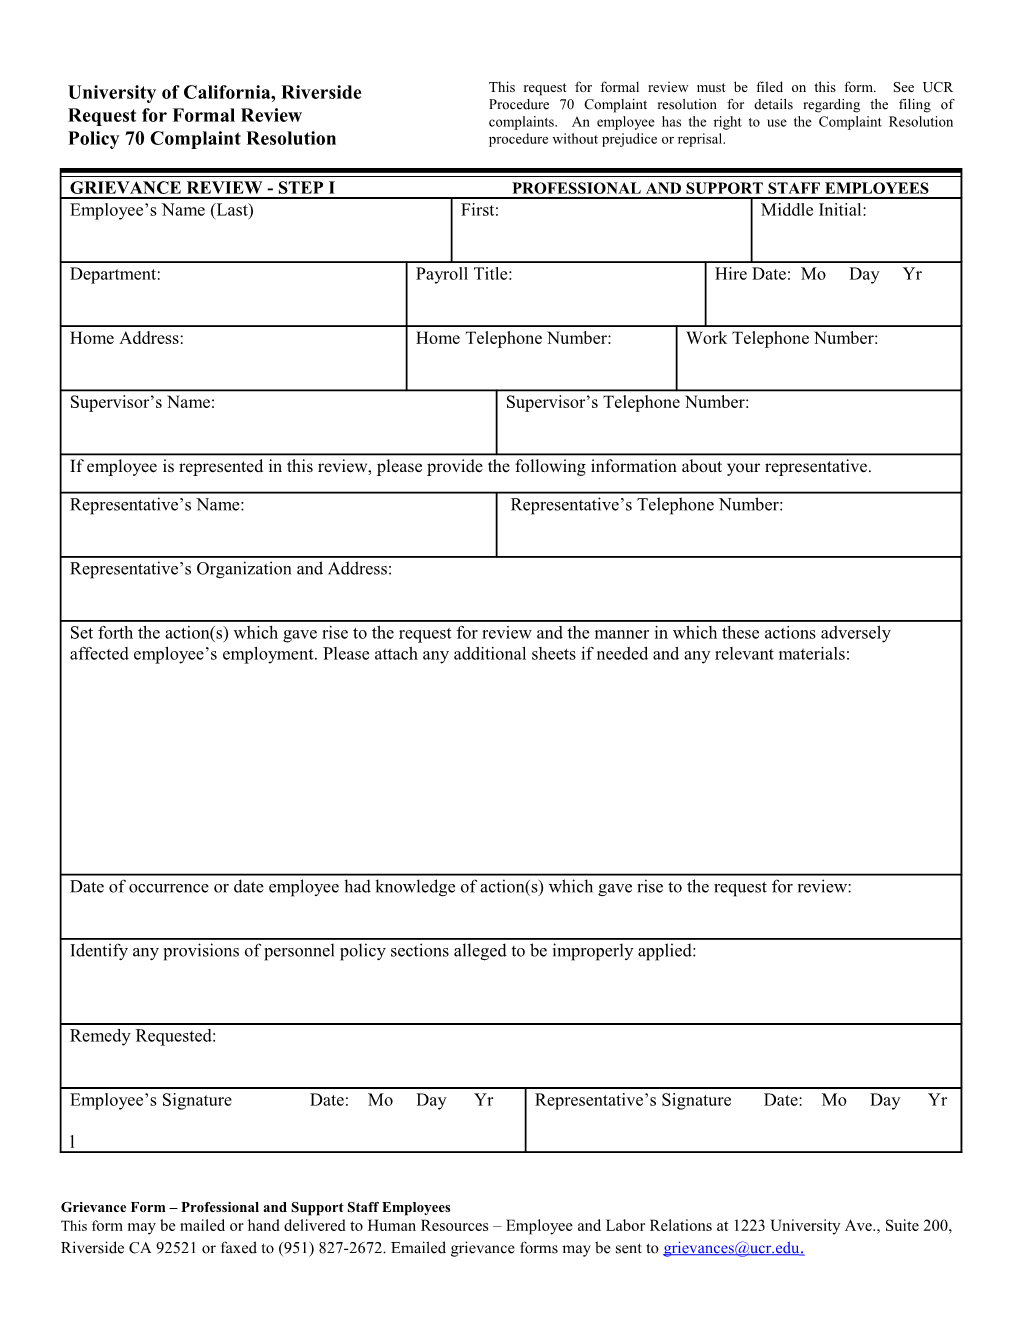 Personnel Policy/Procedure 70 Formal Grievance Form